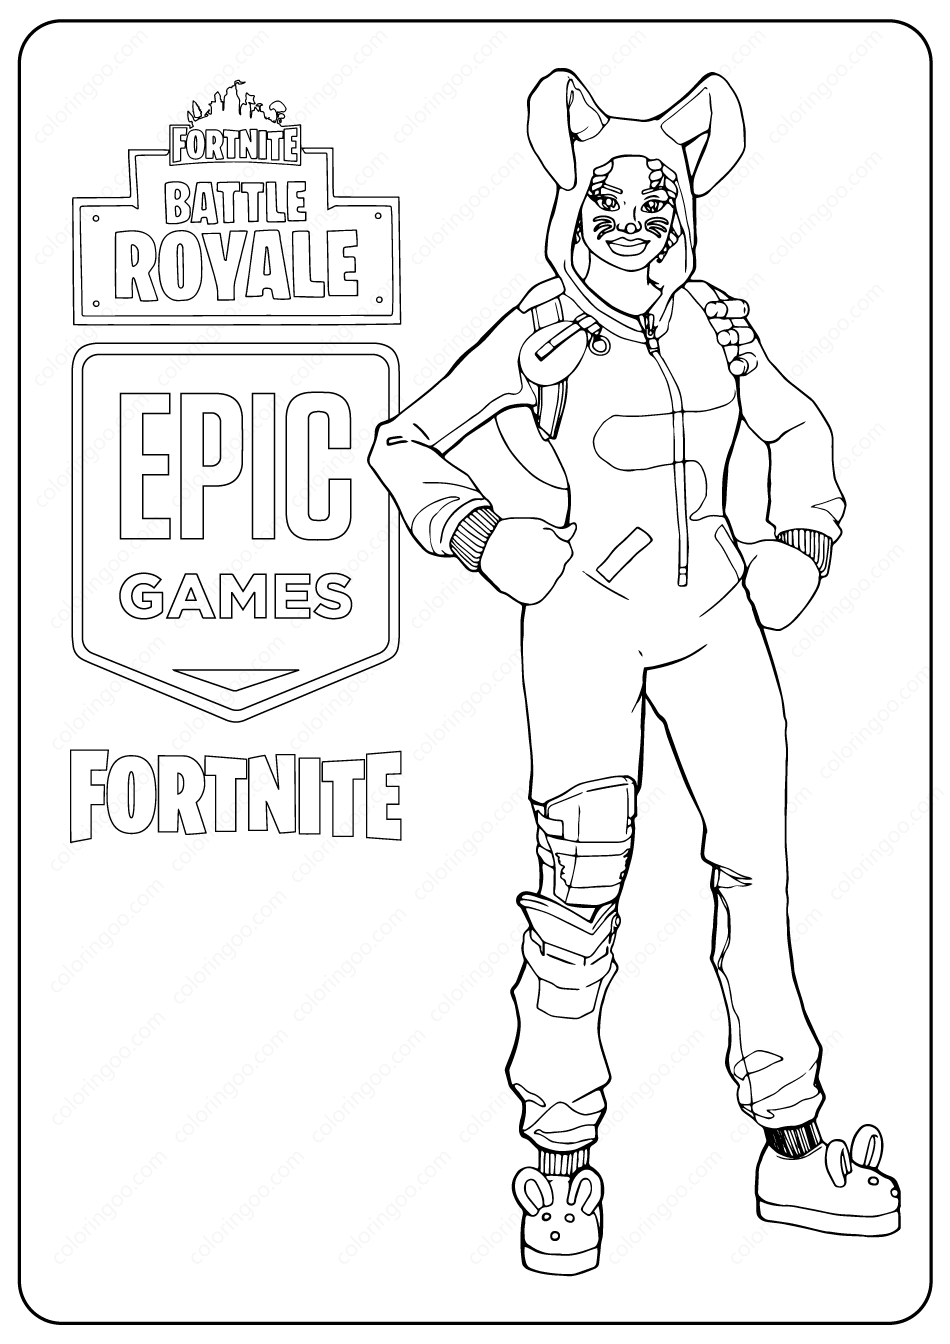 Free Printable Fortnite Bunny Brawler Skin Coloring Pages